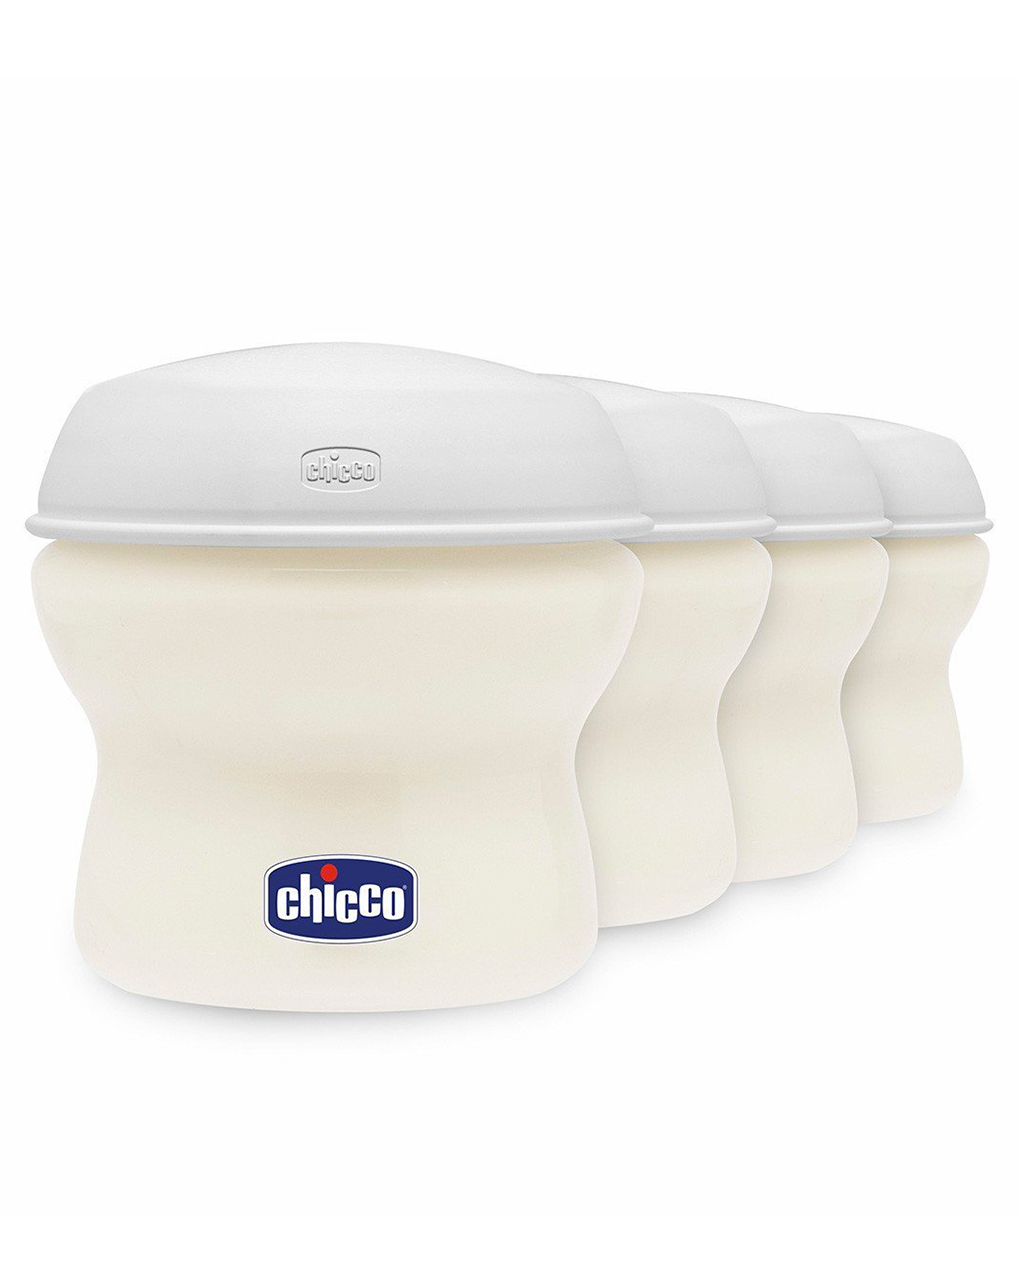 Contenitore latte step up new - Chicco